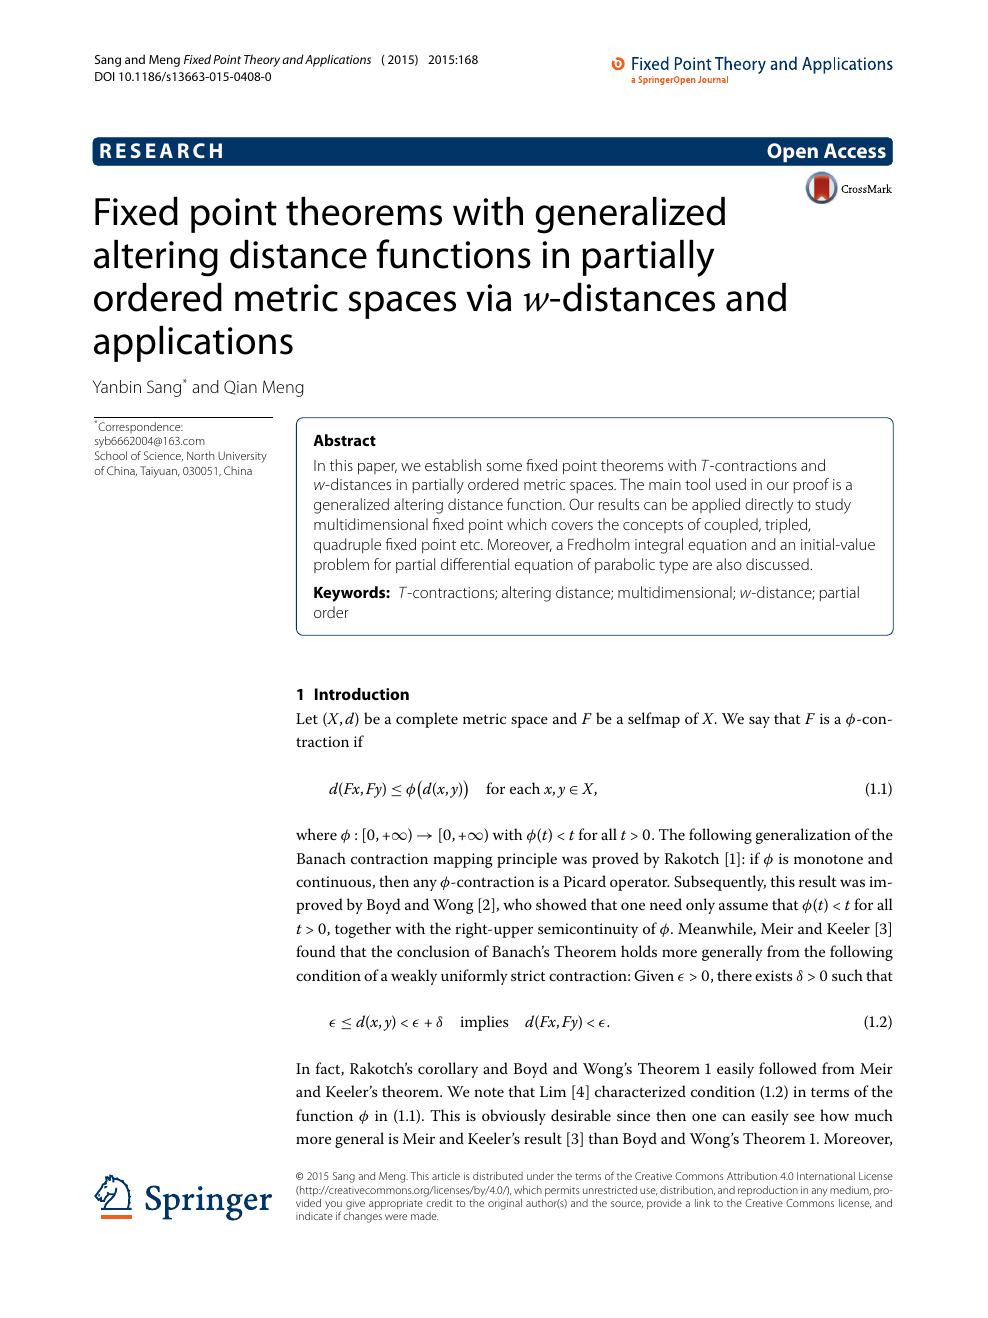 Fixed Point Theorems With Generalized Altering Distance Functions In Partially Ordered Metric Spaces Via W Distances And Applications Topic Of Research Paper In Mathematics Download Scholarly Article Pdf And Read For Free